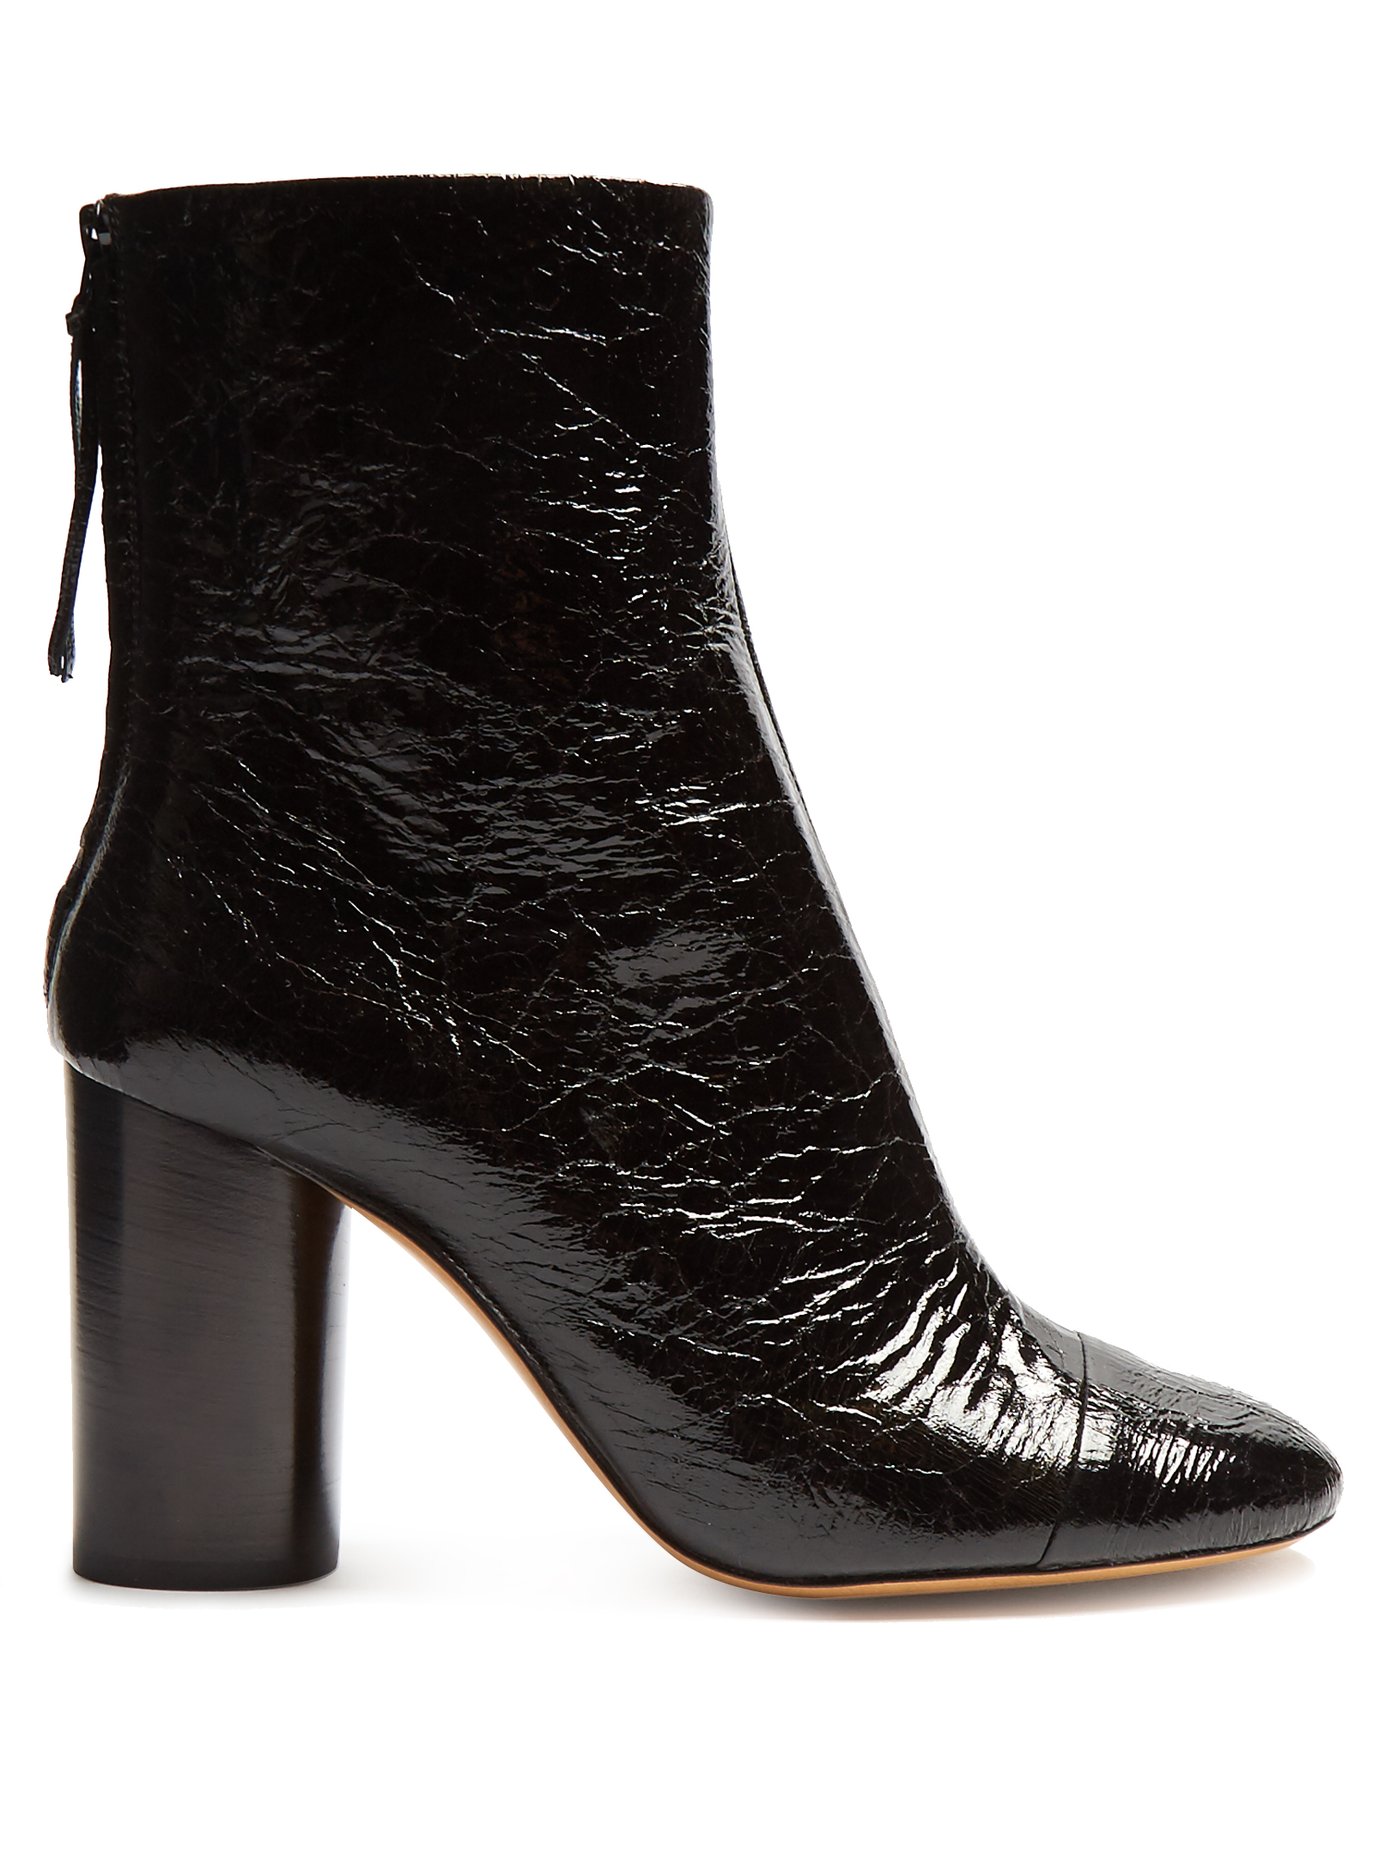 Grover crinkle patent-leather ankle 